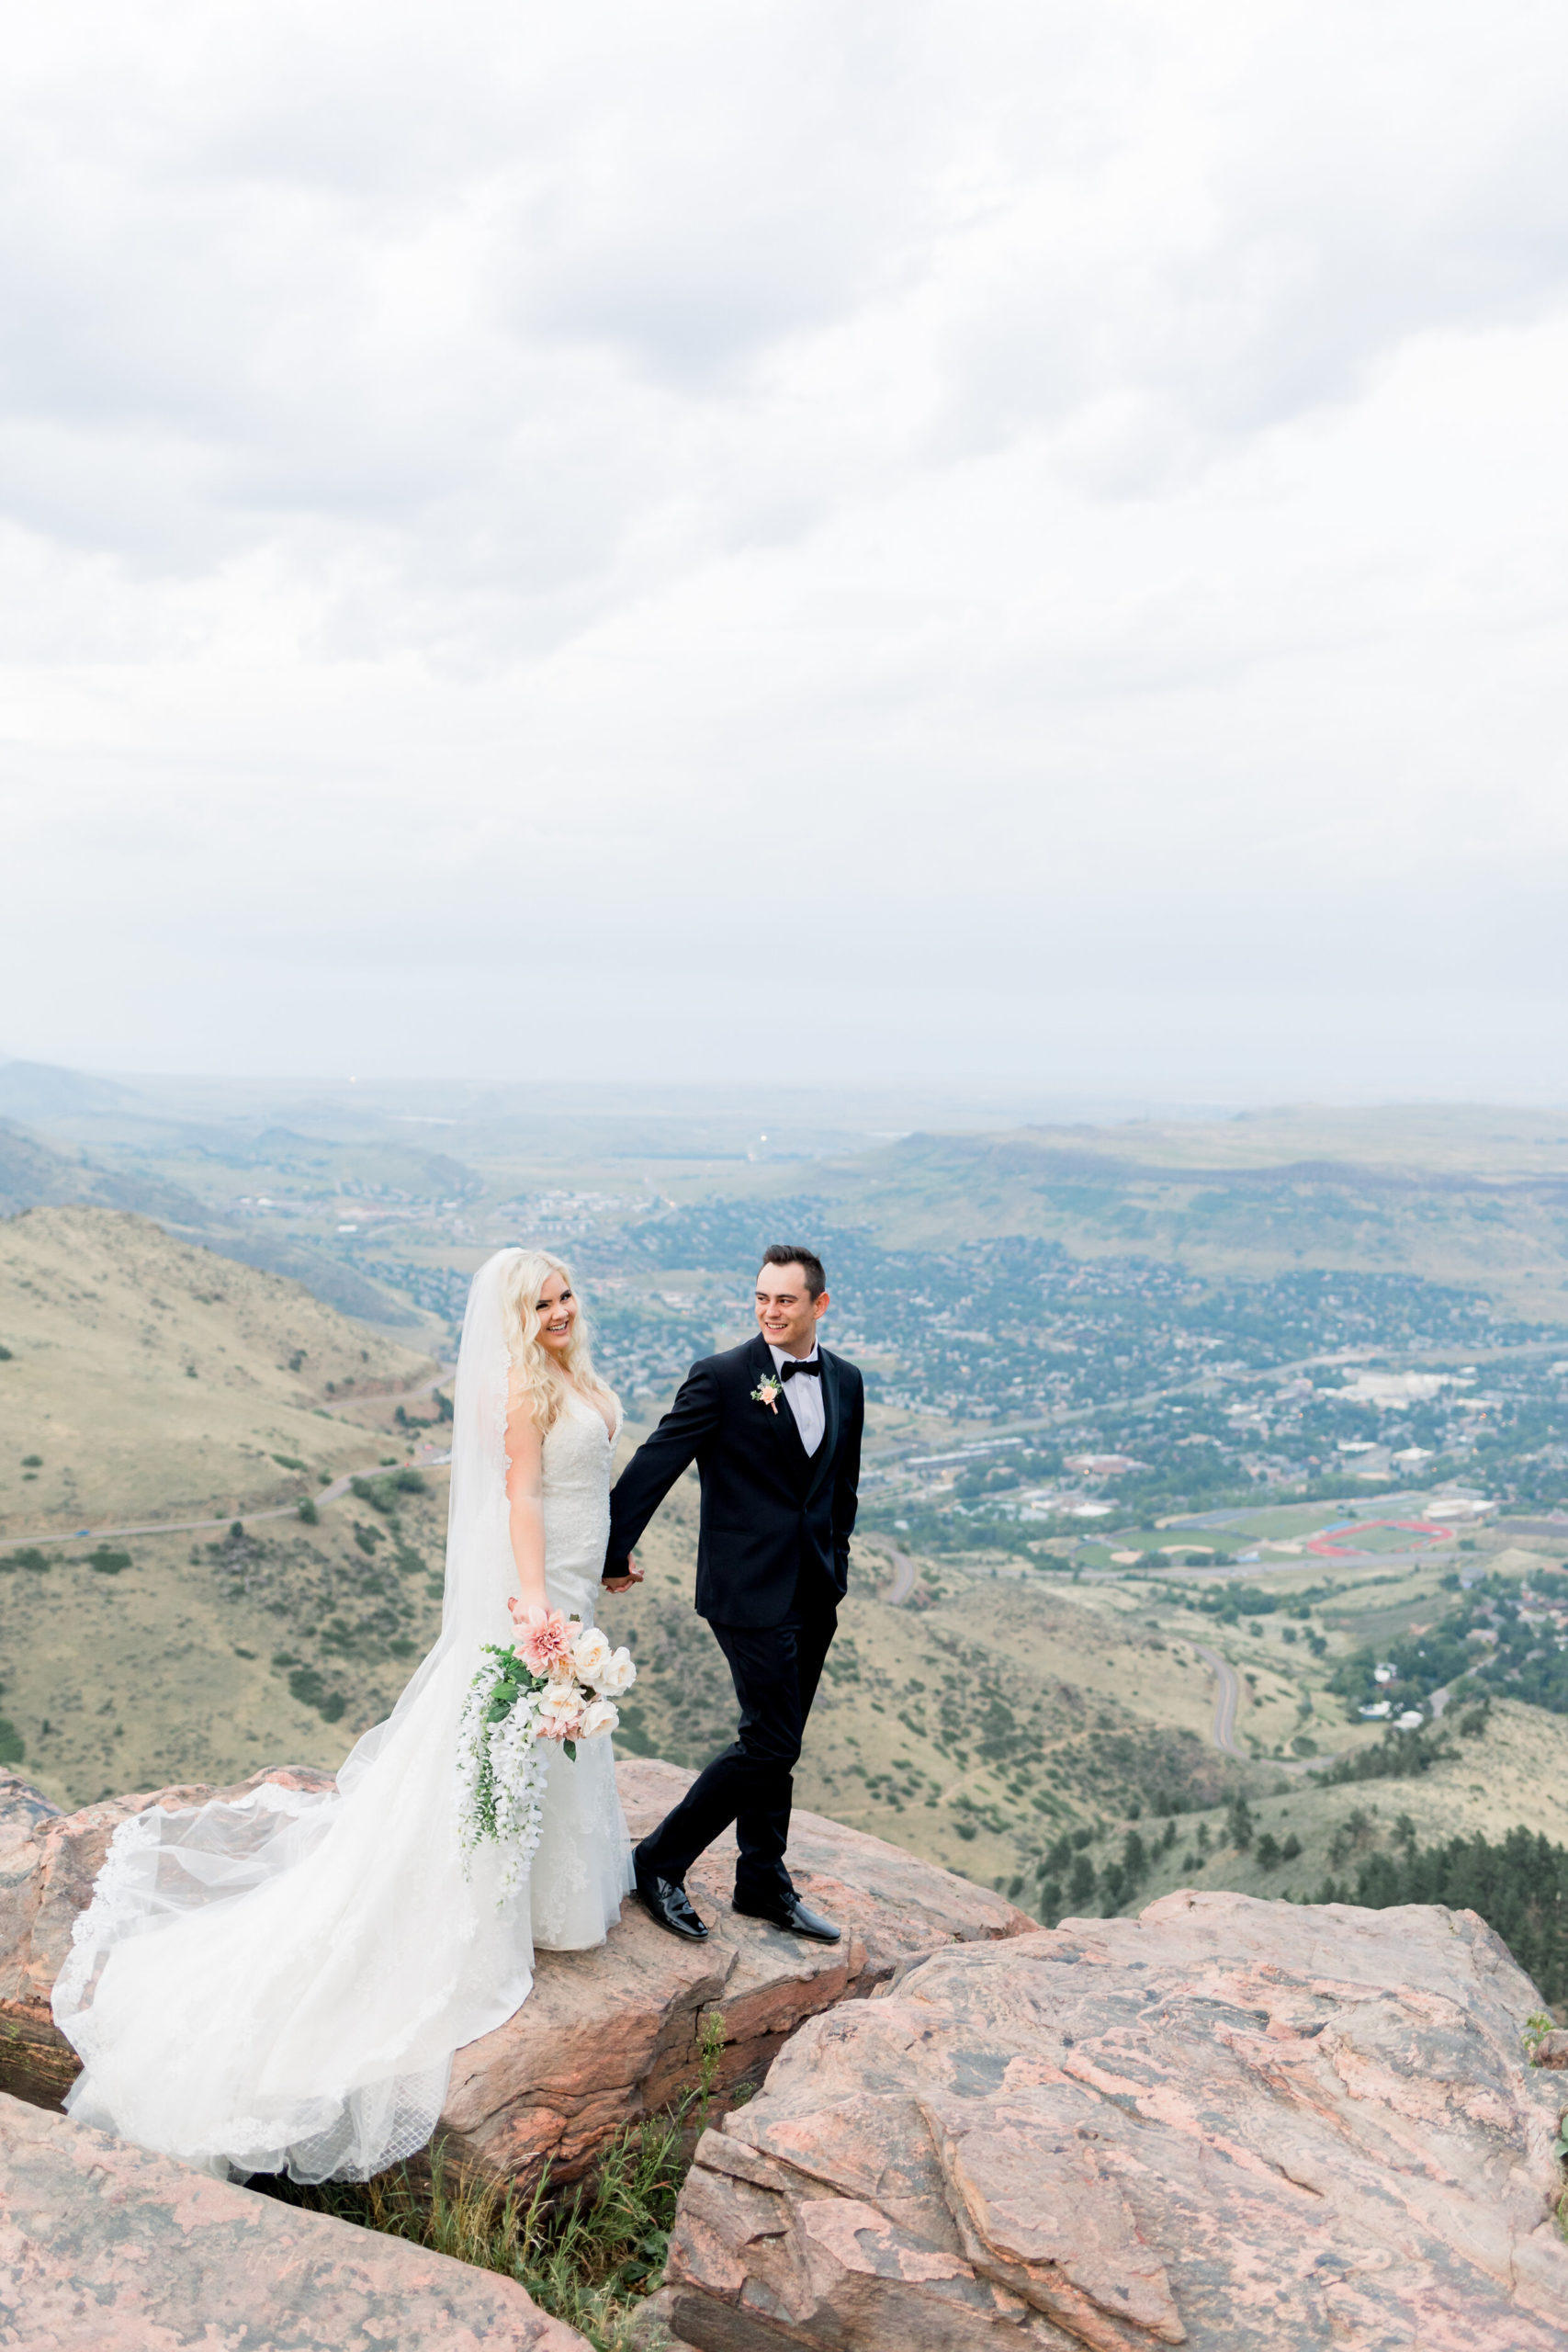 Michael + Kylie's First Look at Lookout Mountain, Colorado